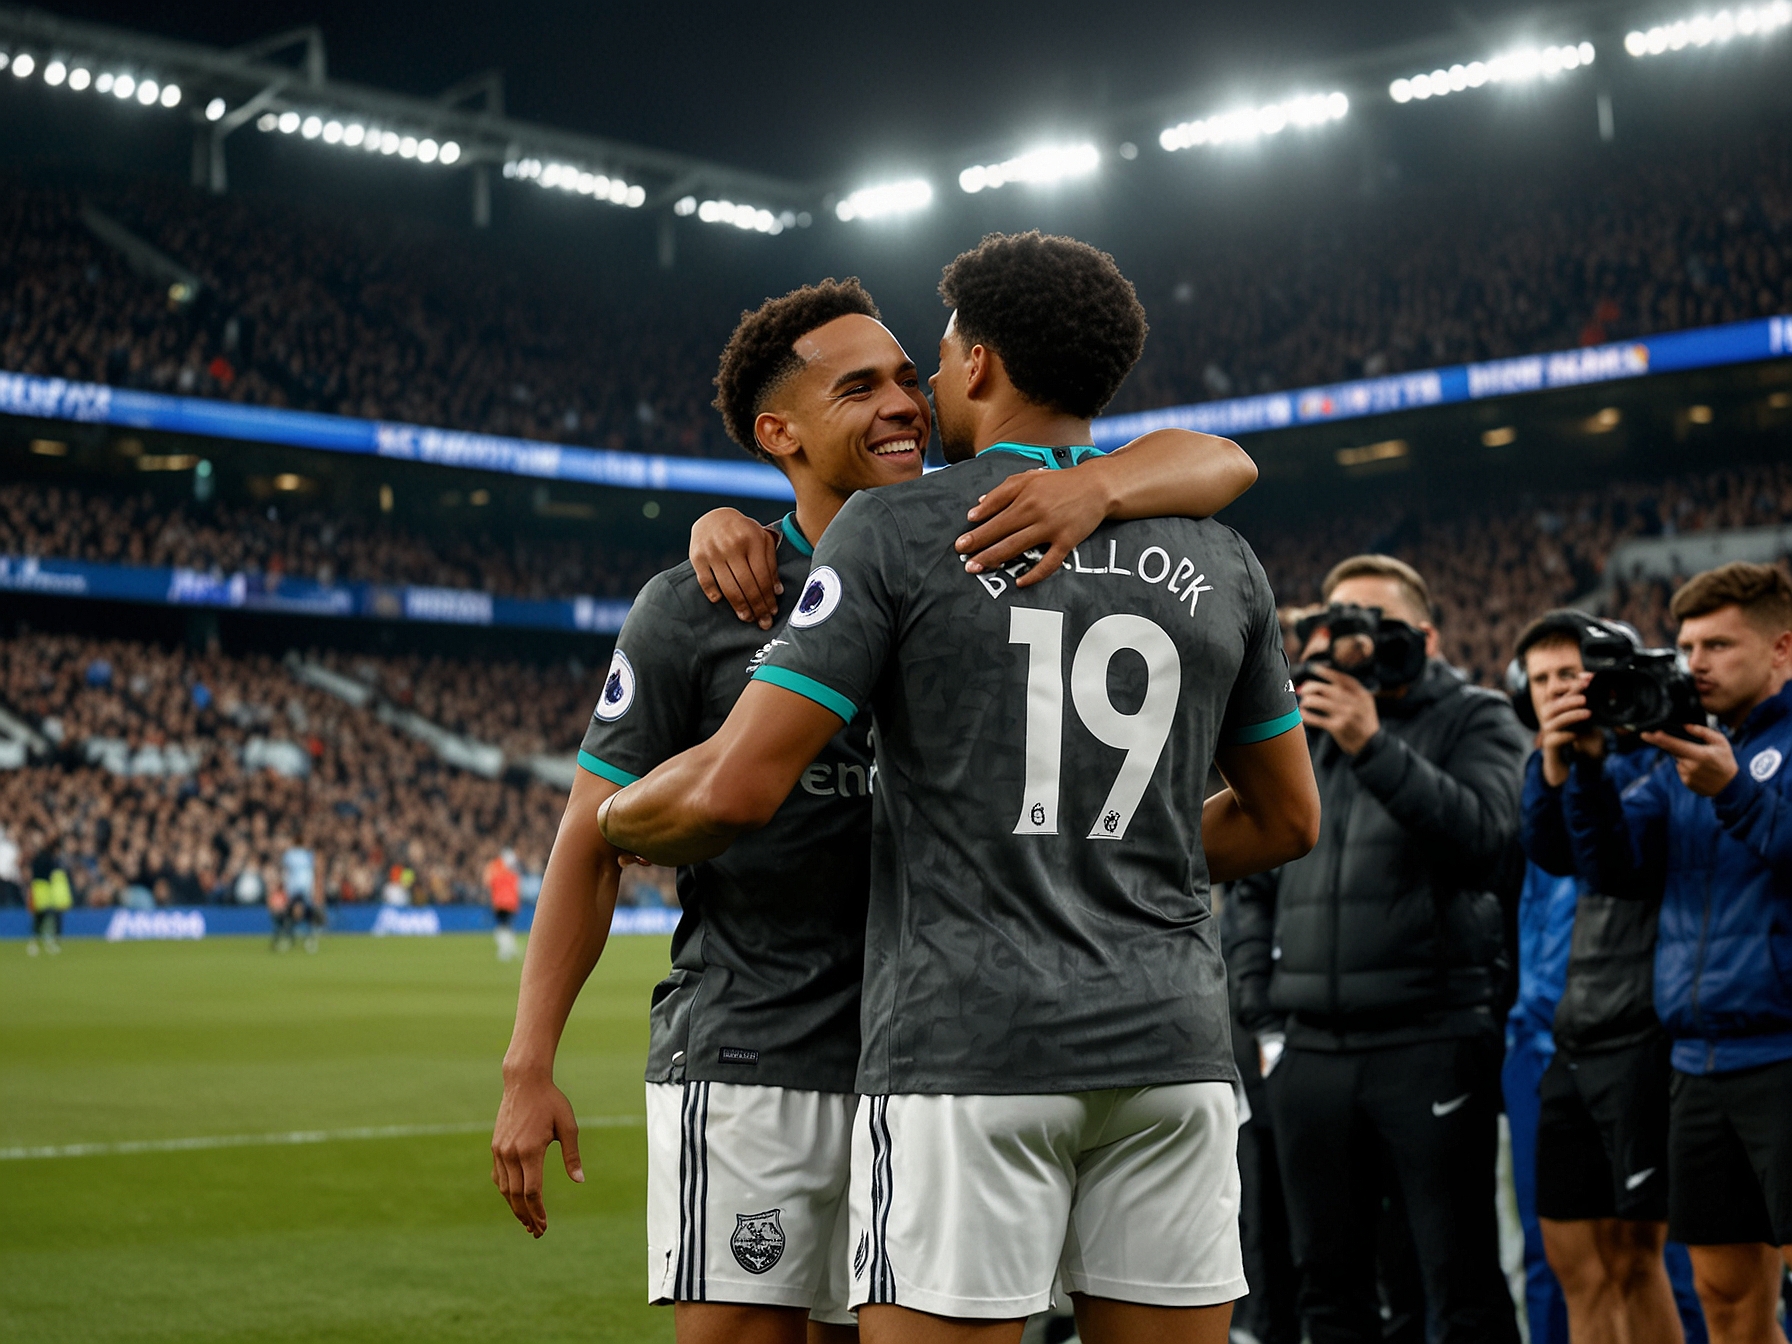 Jude Bellingham and Trent Alexander-Arnold performing the 'wolf' celebration on the field, symbolizing the unity and strength of their team, with teammates and fans cheering them on.